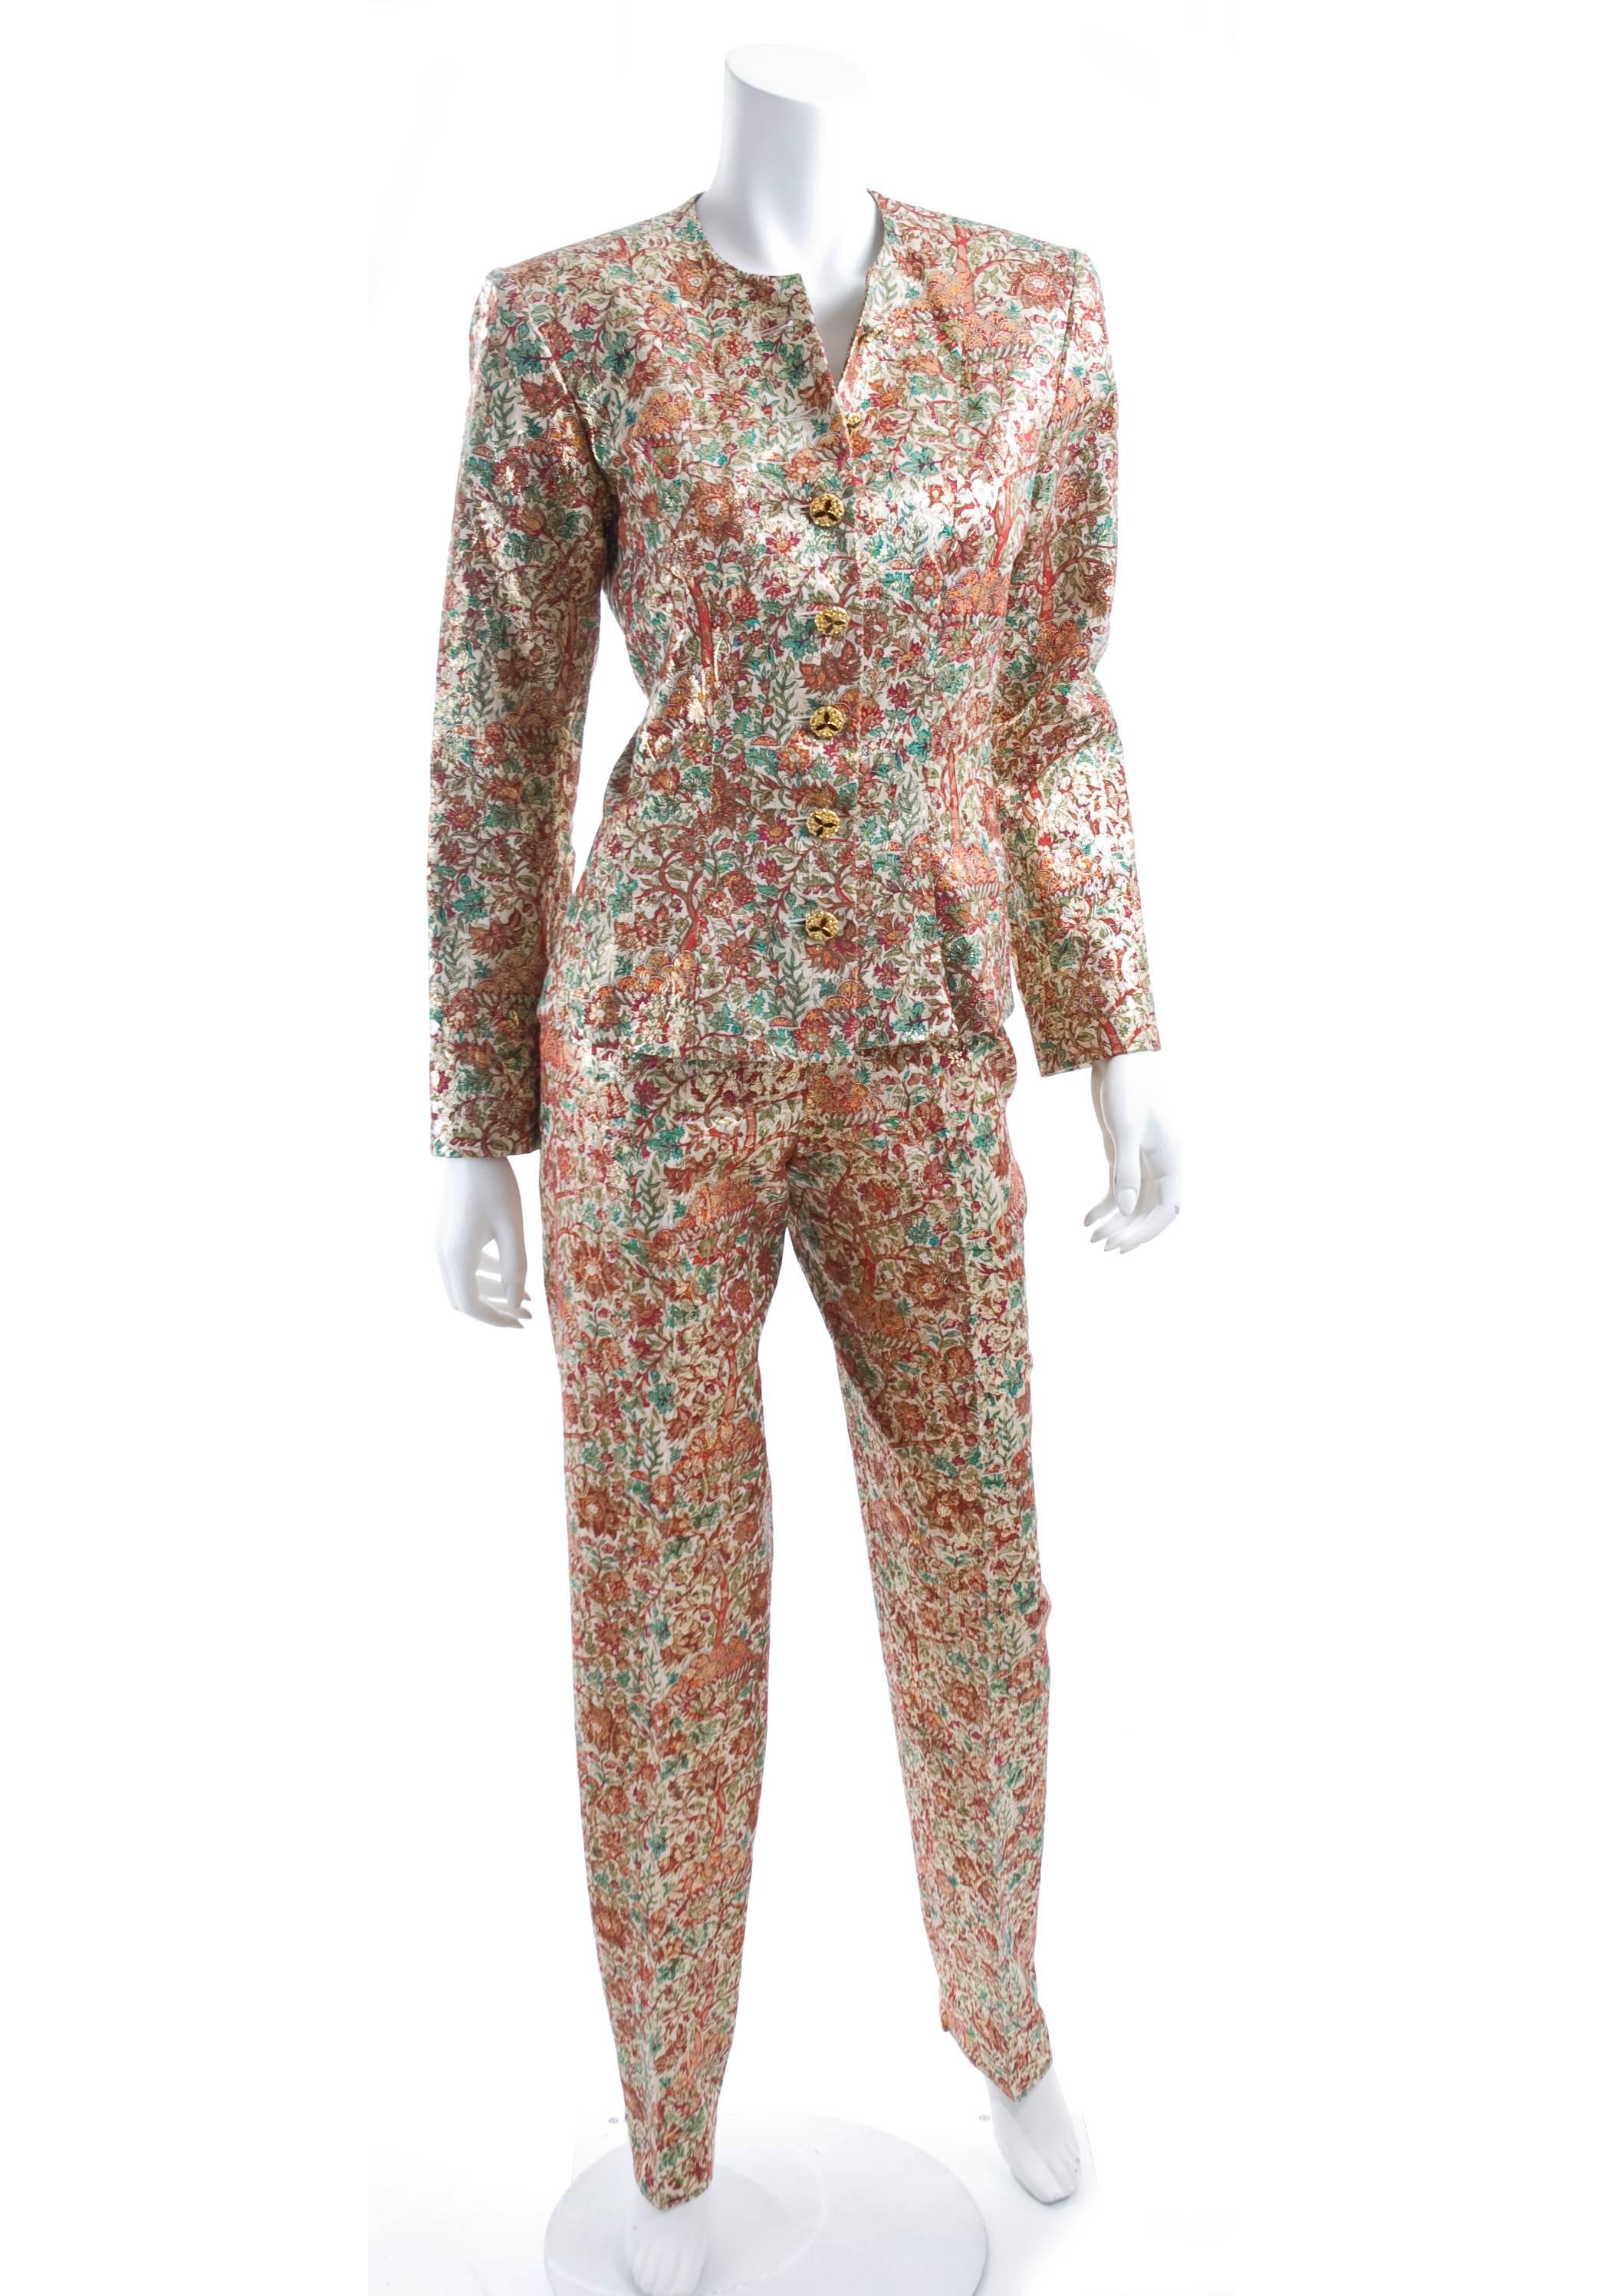 Women's Vintage Yves Saint Laurent Brocade Suit in Gold, Red and Green For Sale